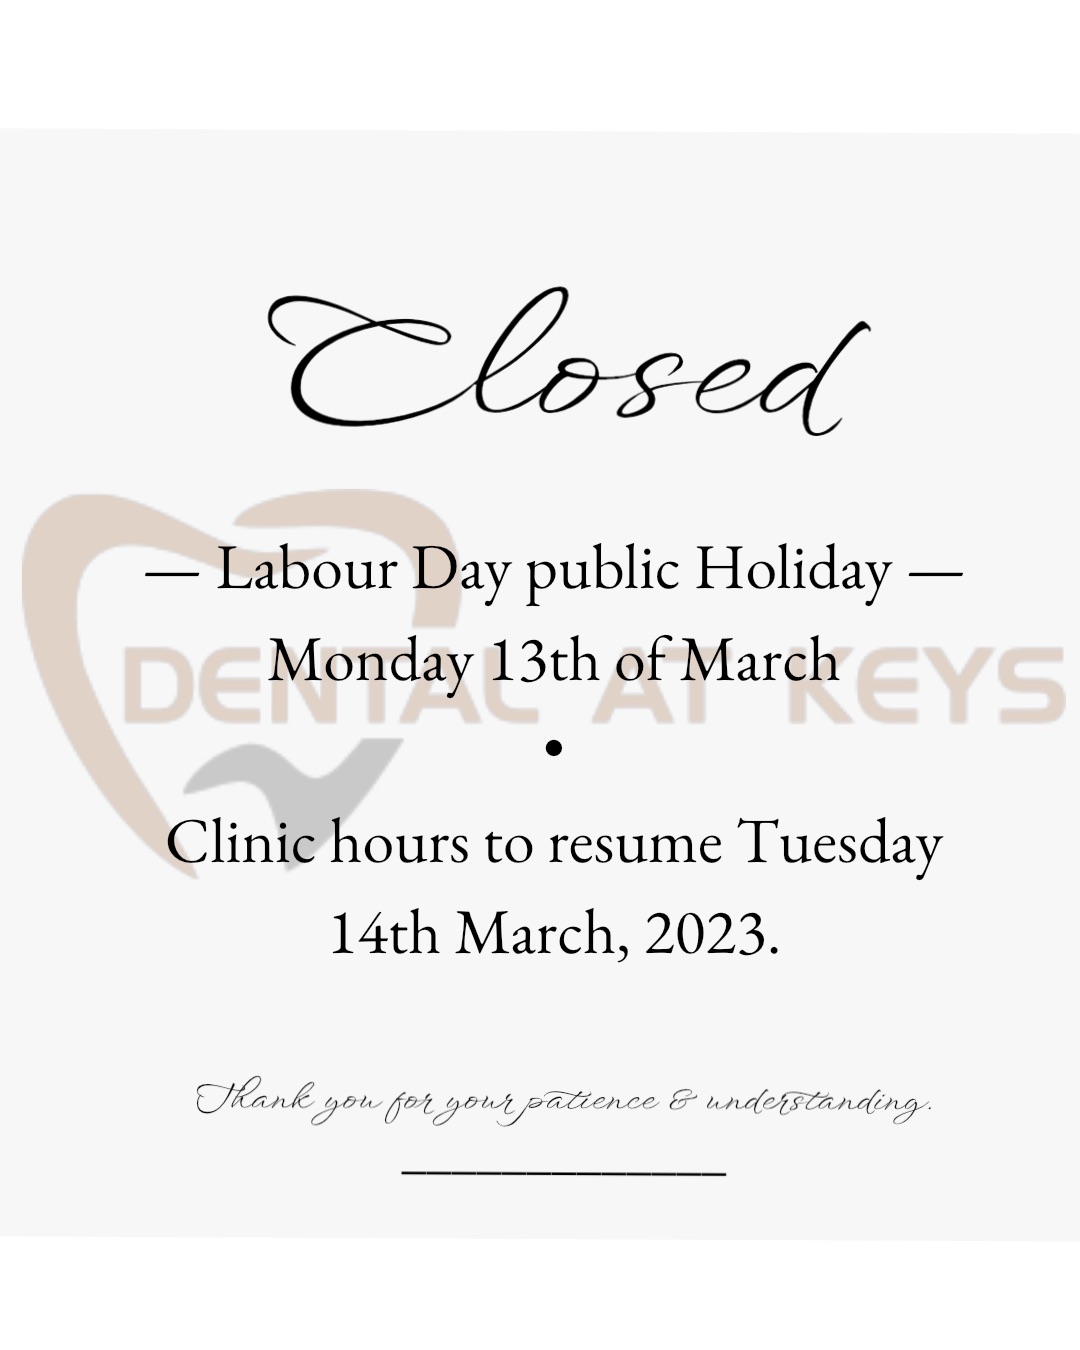 Closed -Labour Day!